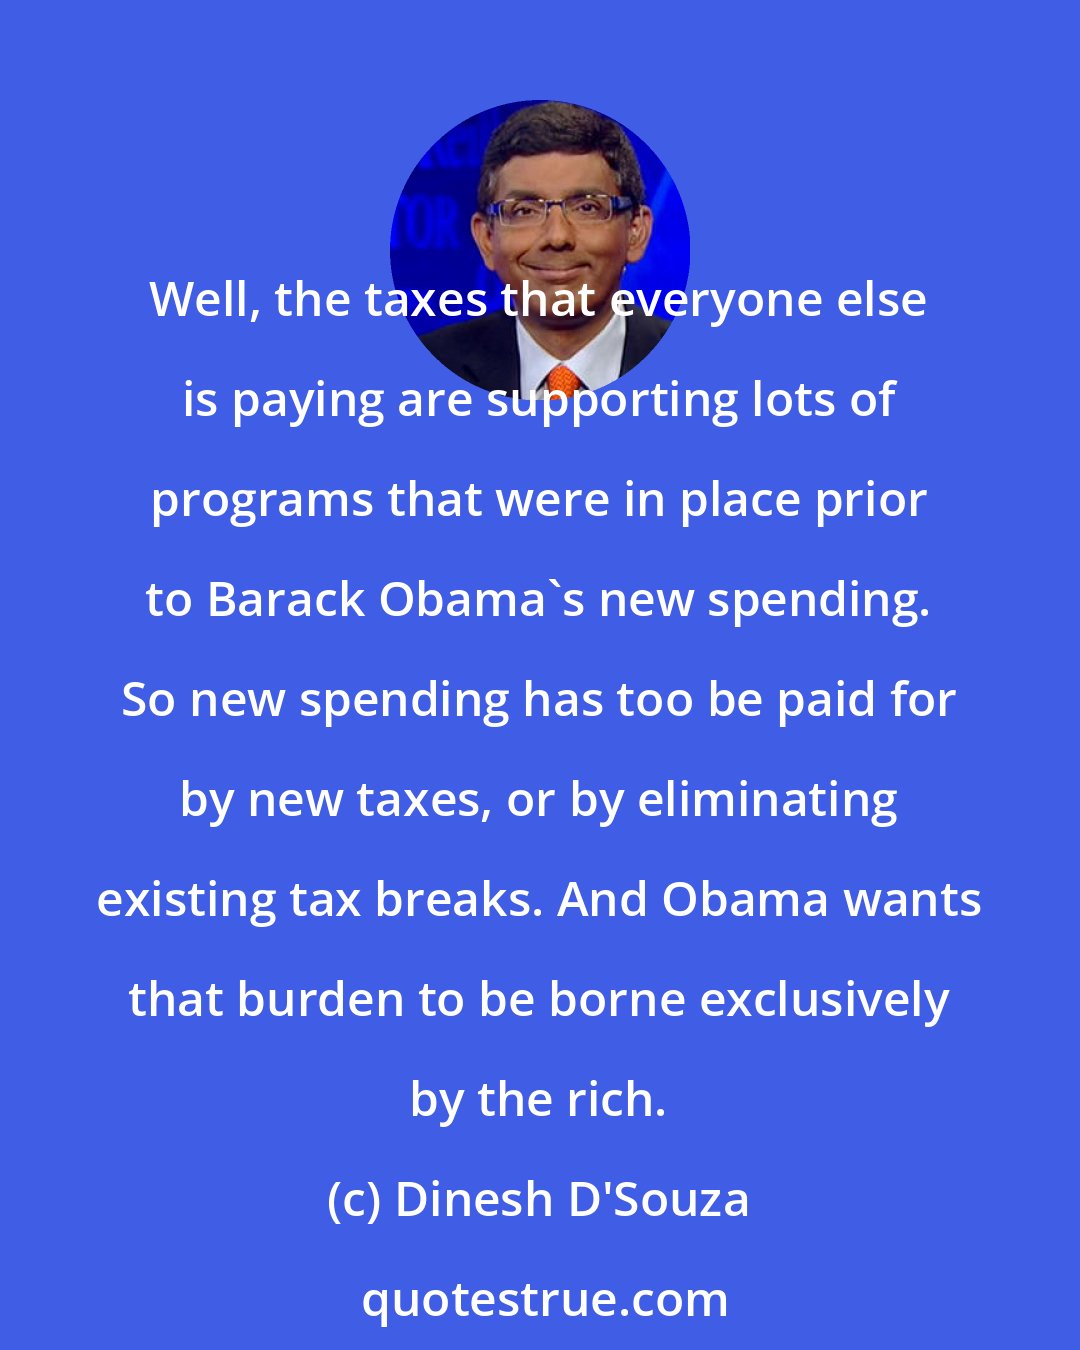 Dinesh D'Souza: Well, the taxes that everyone else is paying are supporting lots of programs that were in place prior to Barack Obama's new spending. So new spending has too be paid for by new taxes, or by eliminating existing tax breaks. And Obama wants that burden to be borne exclusively by the rich.